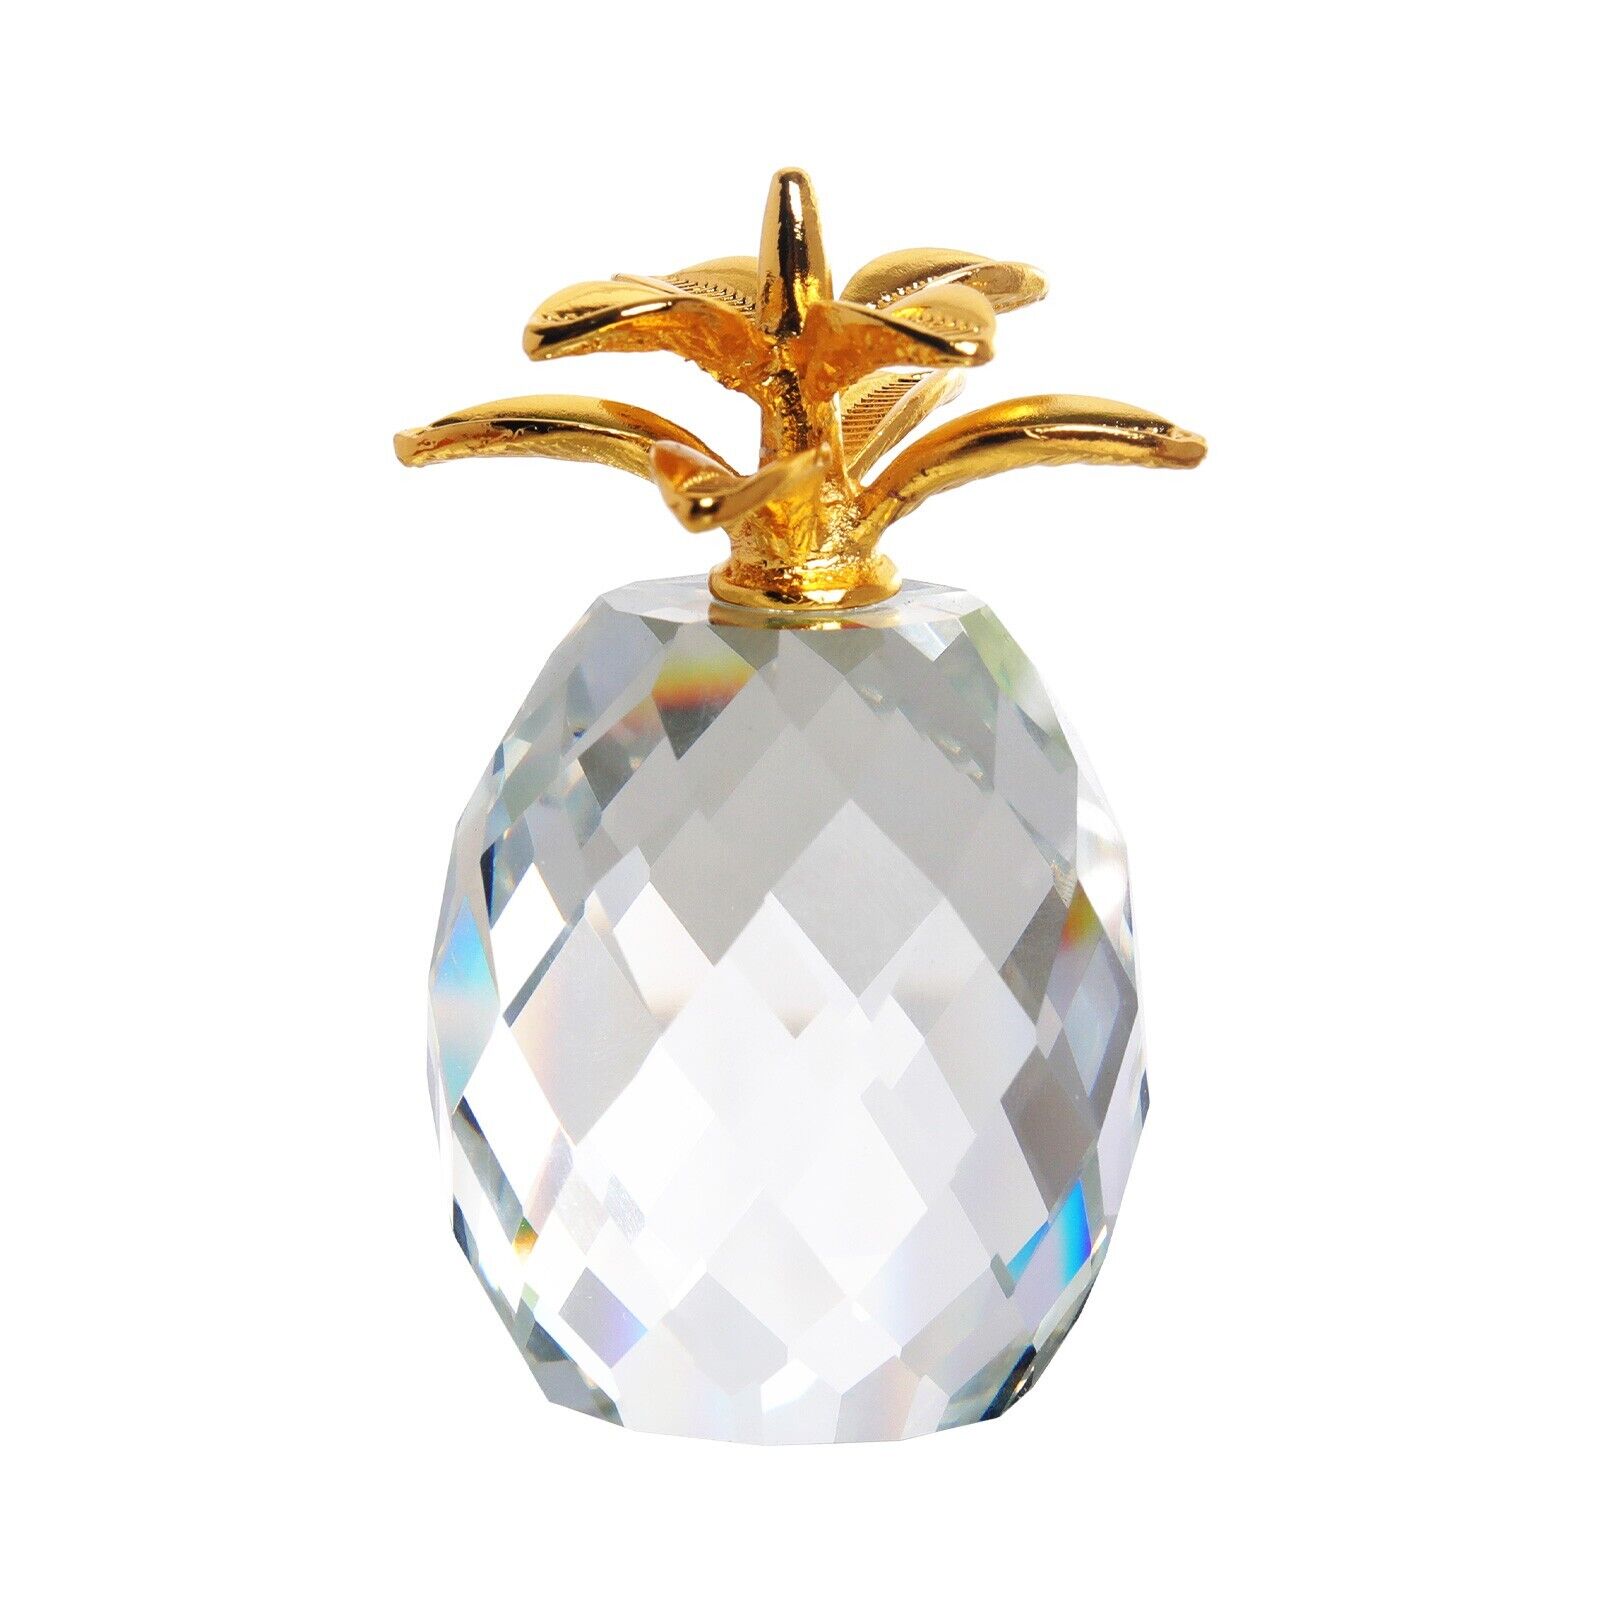 Crystal Pineapple Figurine Fruit Decor Ornament Tabletop Centerpiece Paperweight